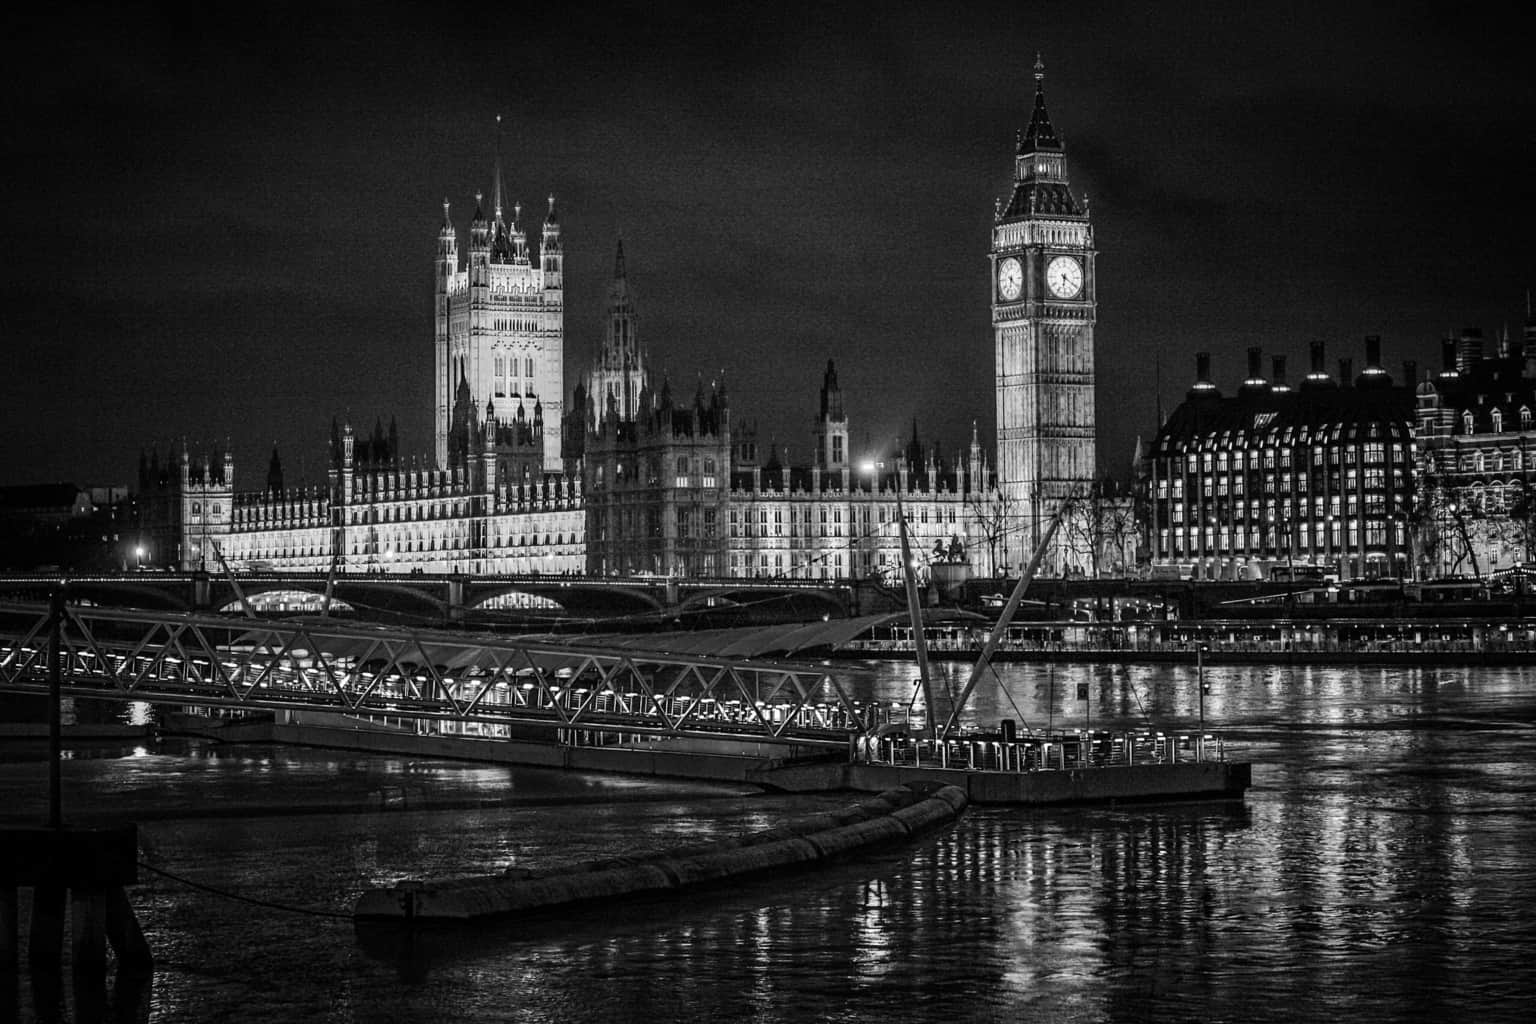  The Palace of Westminster and Big Ben, London photography by Rick McEvoy 